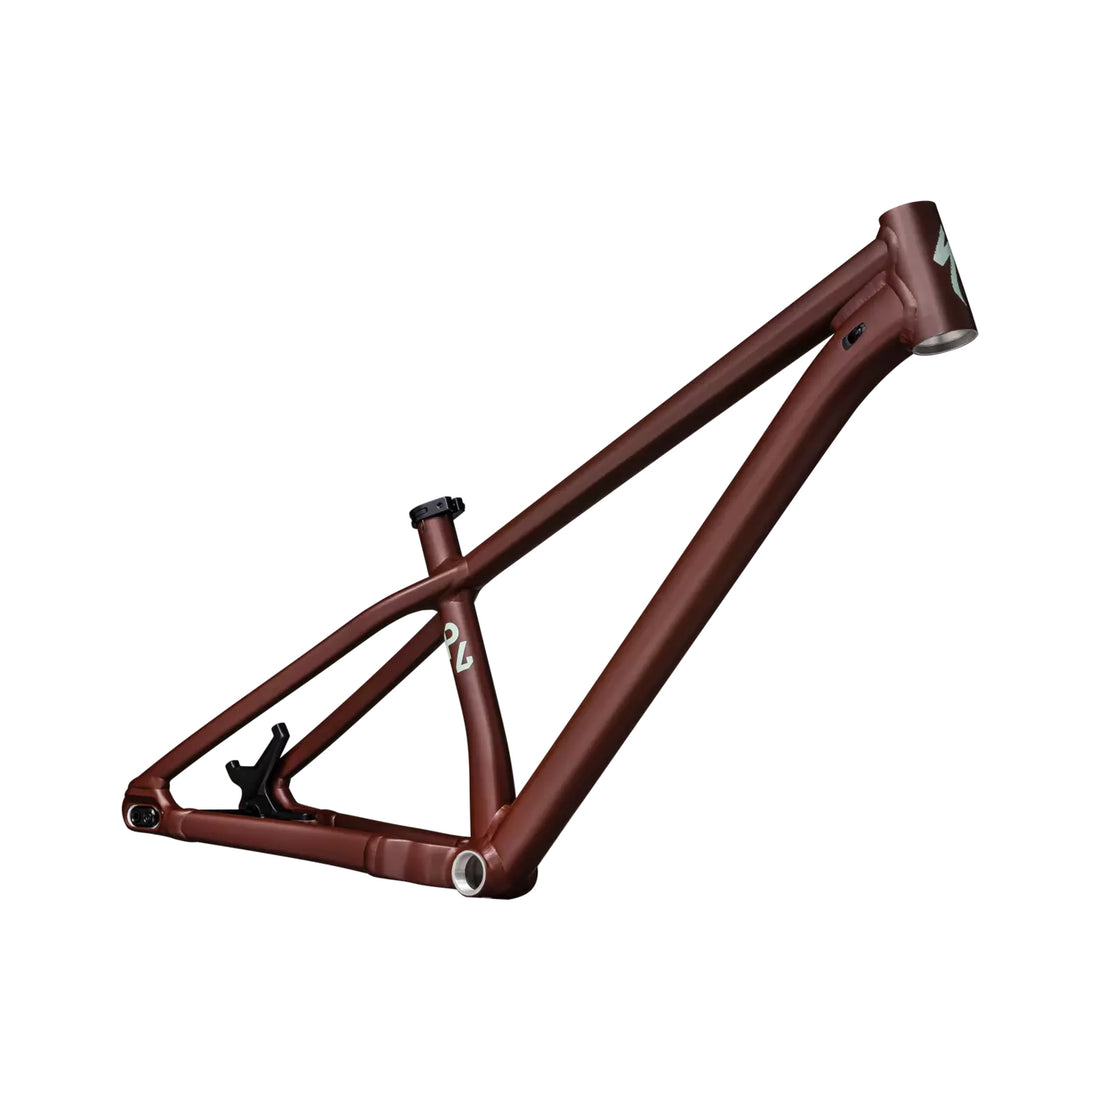 Specialized P.4 Dirt Jump Frame